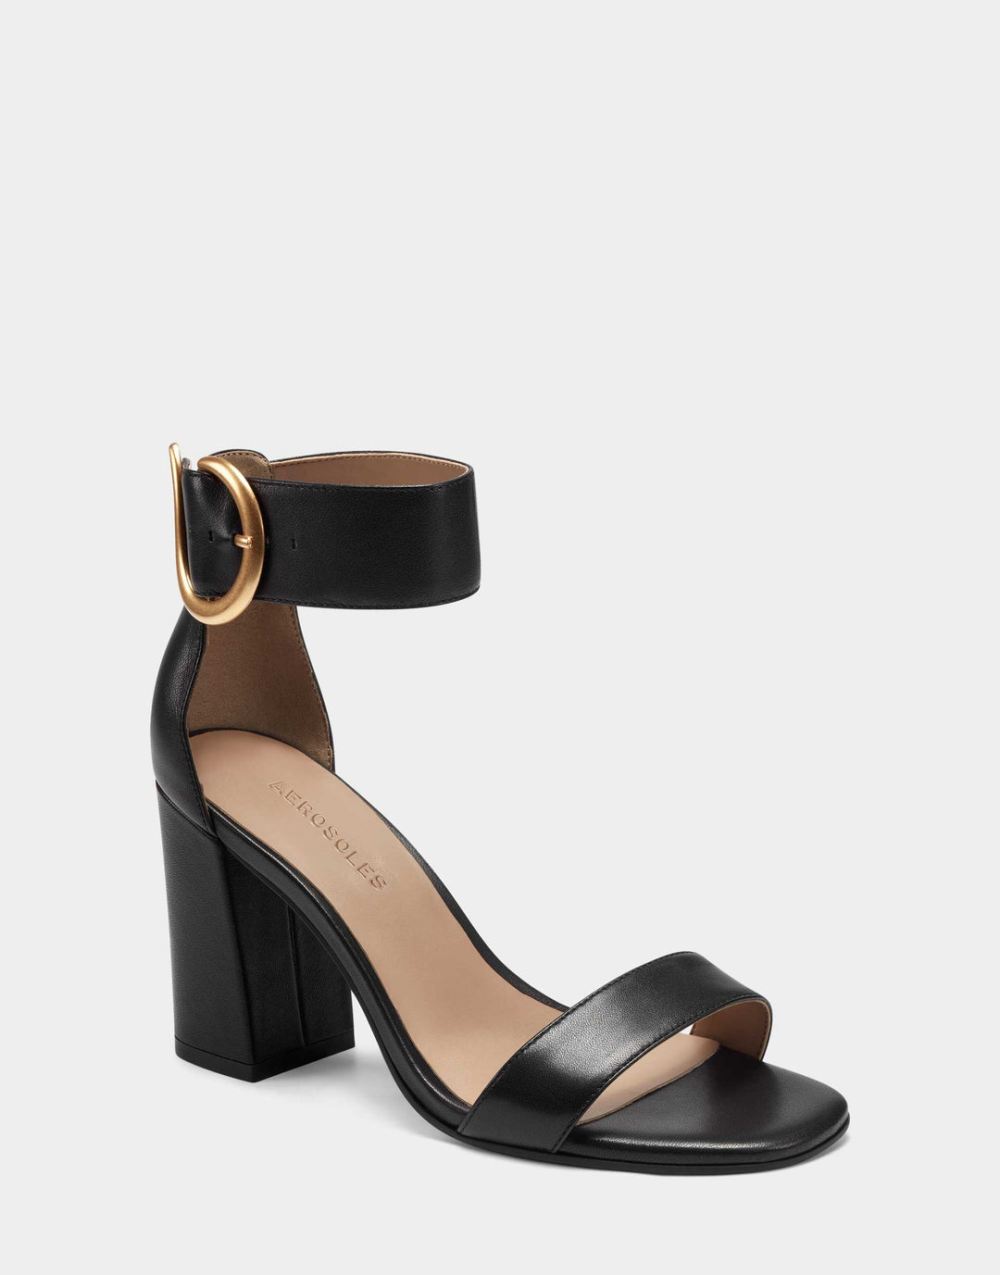 Women's | Black Leather Two Strap Heel with Ankle Strap and Gold Buckle Landon